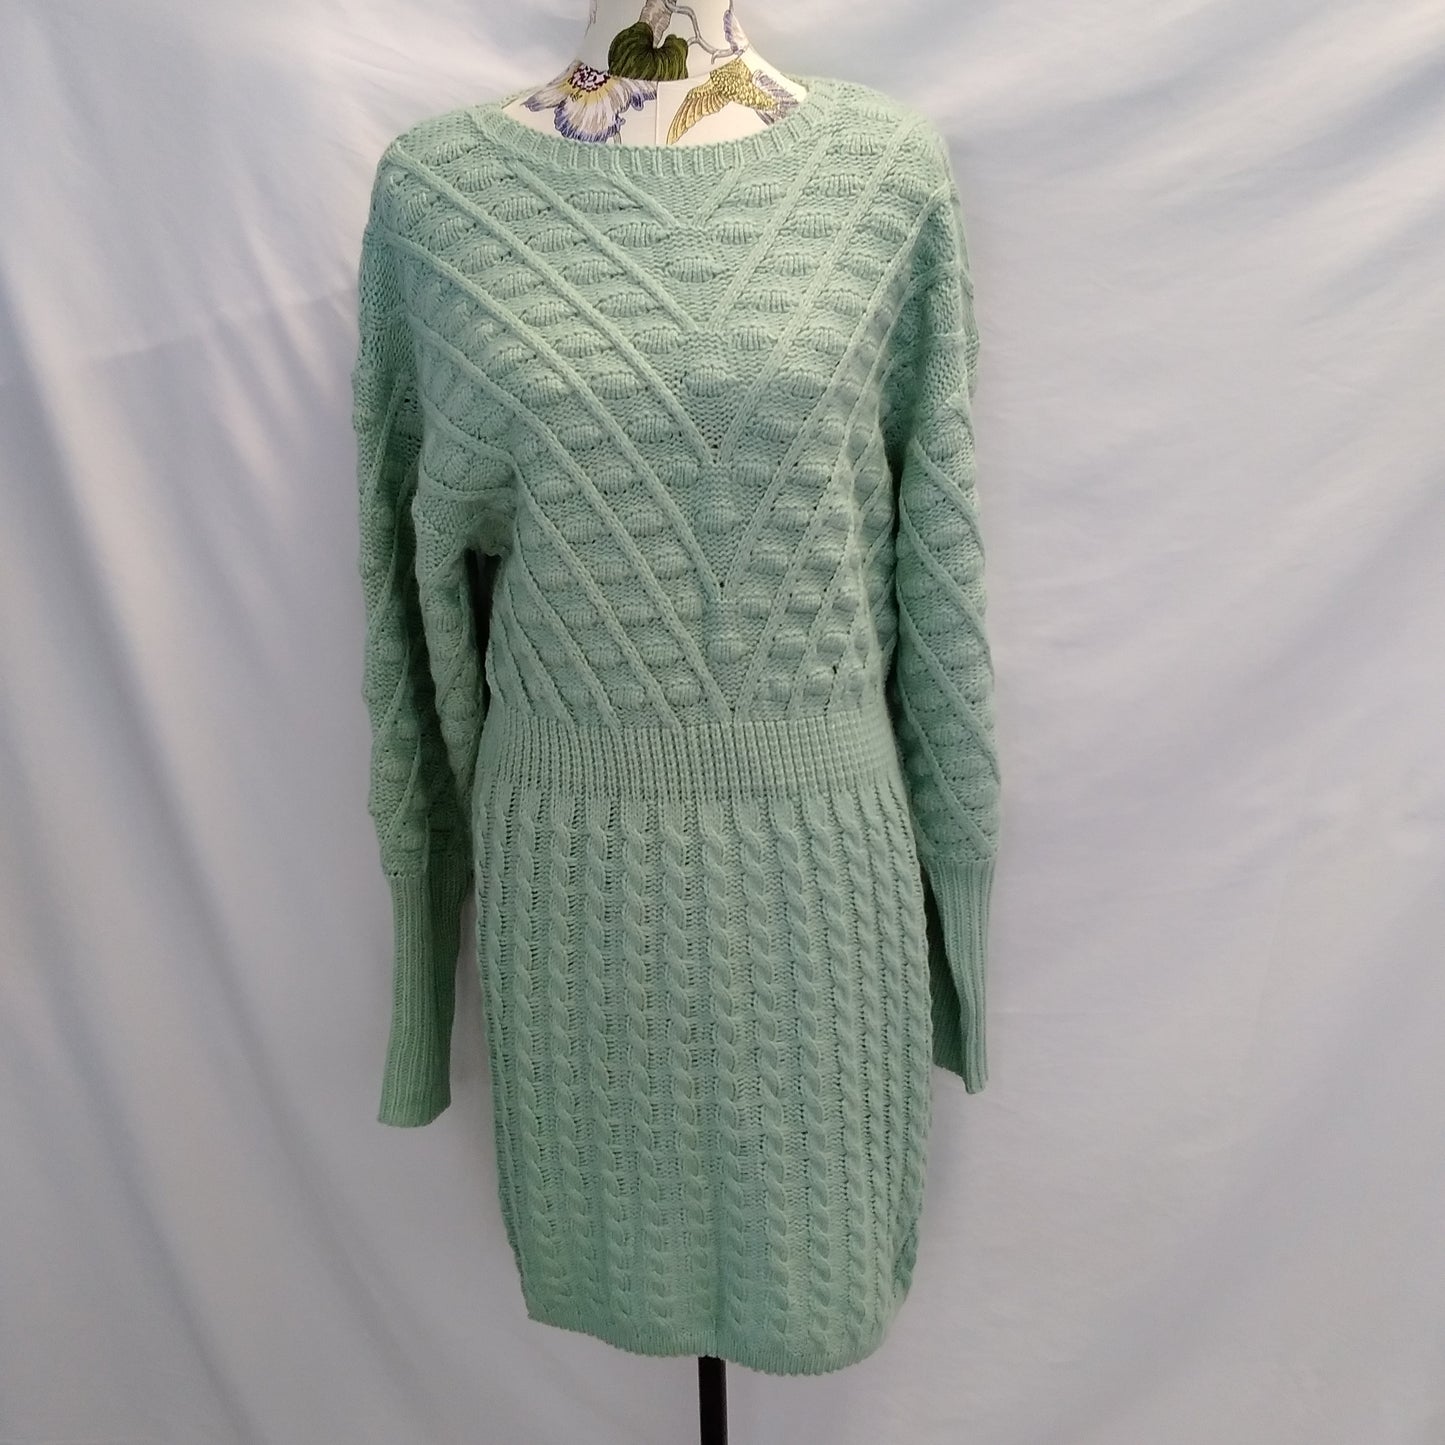 NWT - Lulus green Cable-Knit Sweater Dress - XL